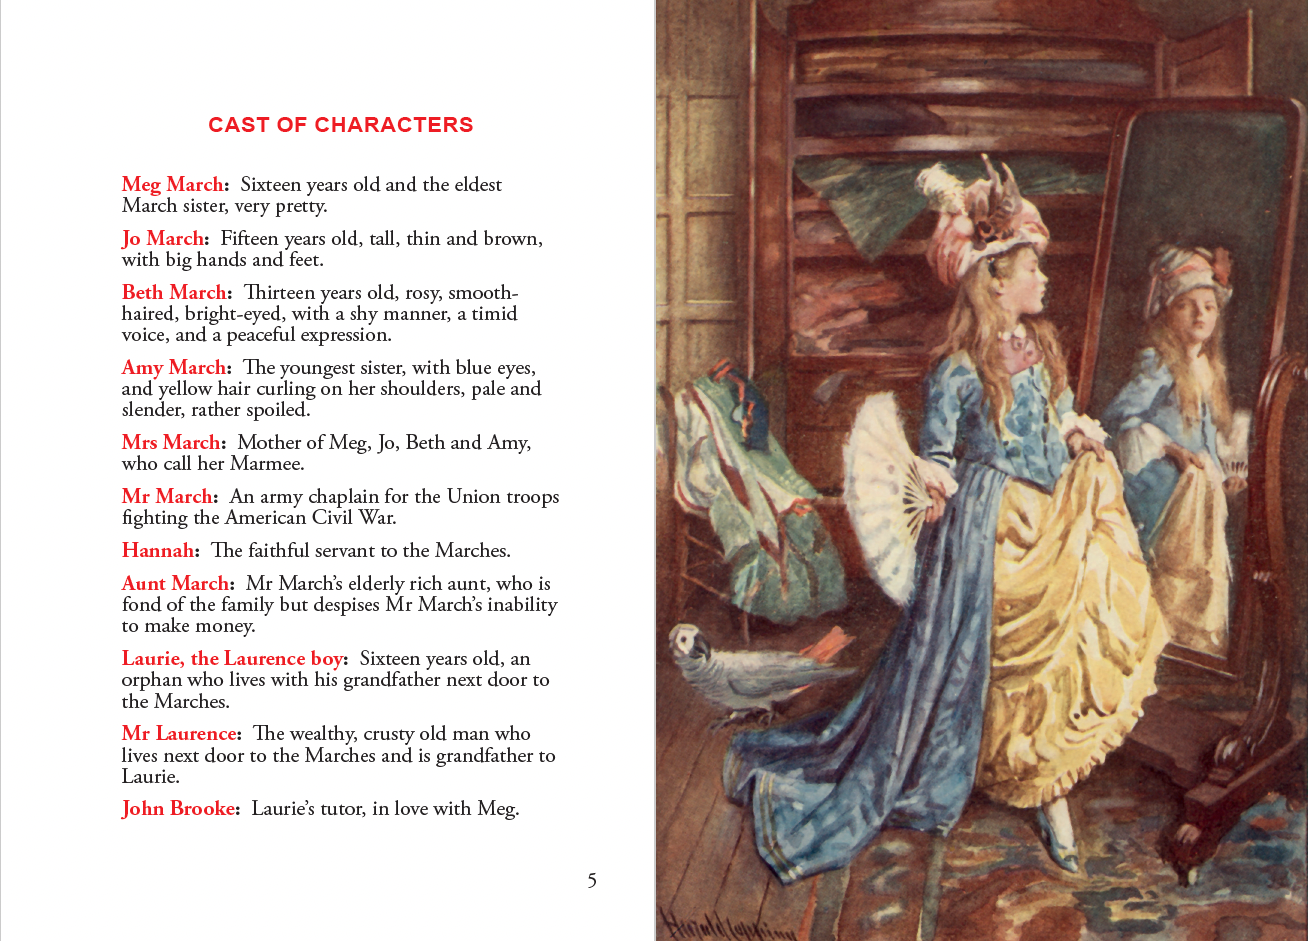 A book spread from Little Women. Pg 5 has the cast of characters and Pg 10 has an illustration of a girl dressed up in front of a mirror holding a fan.